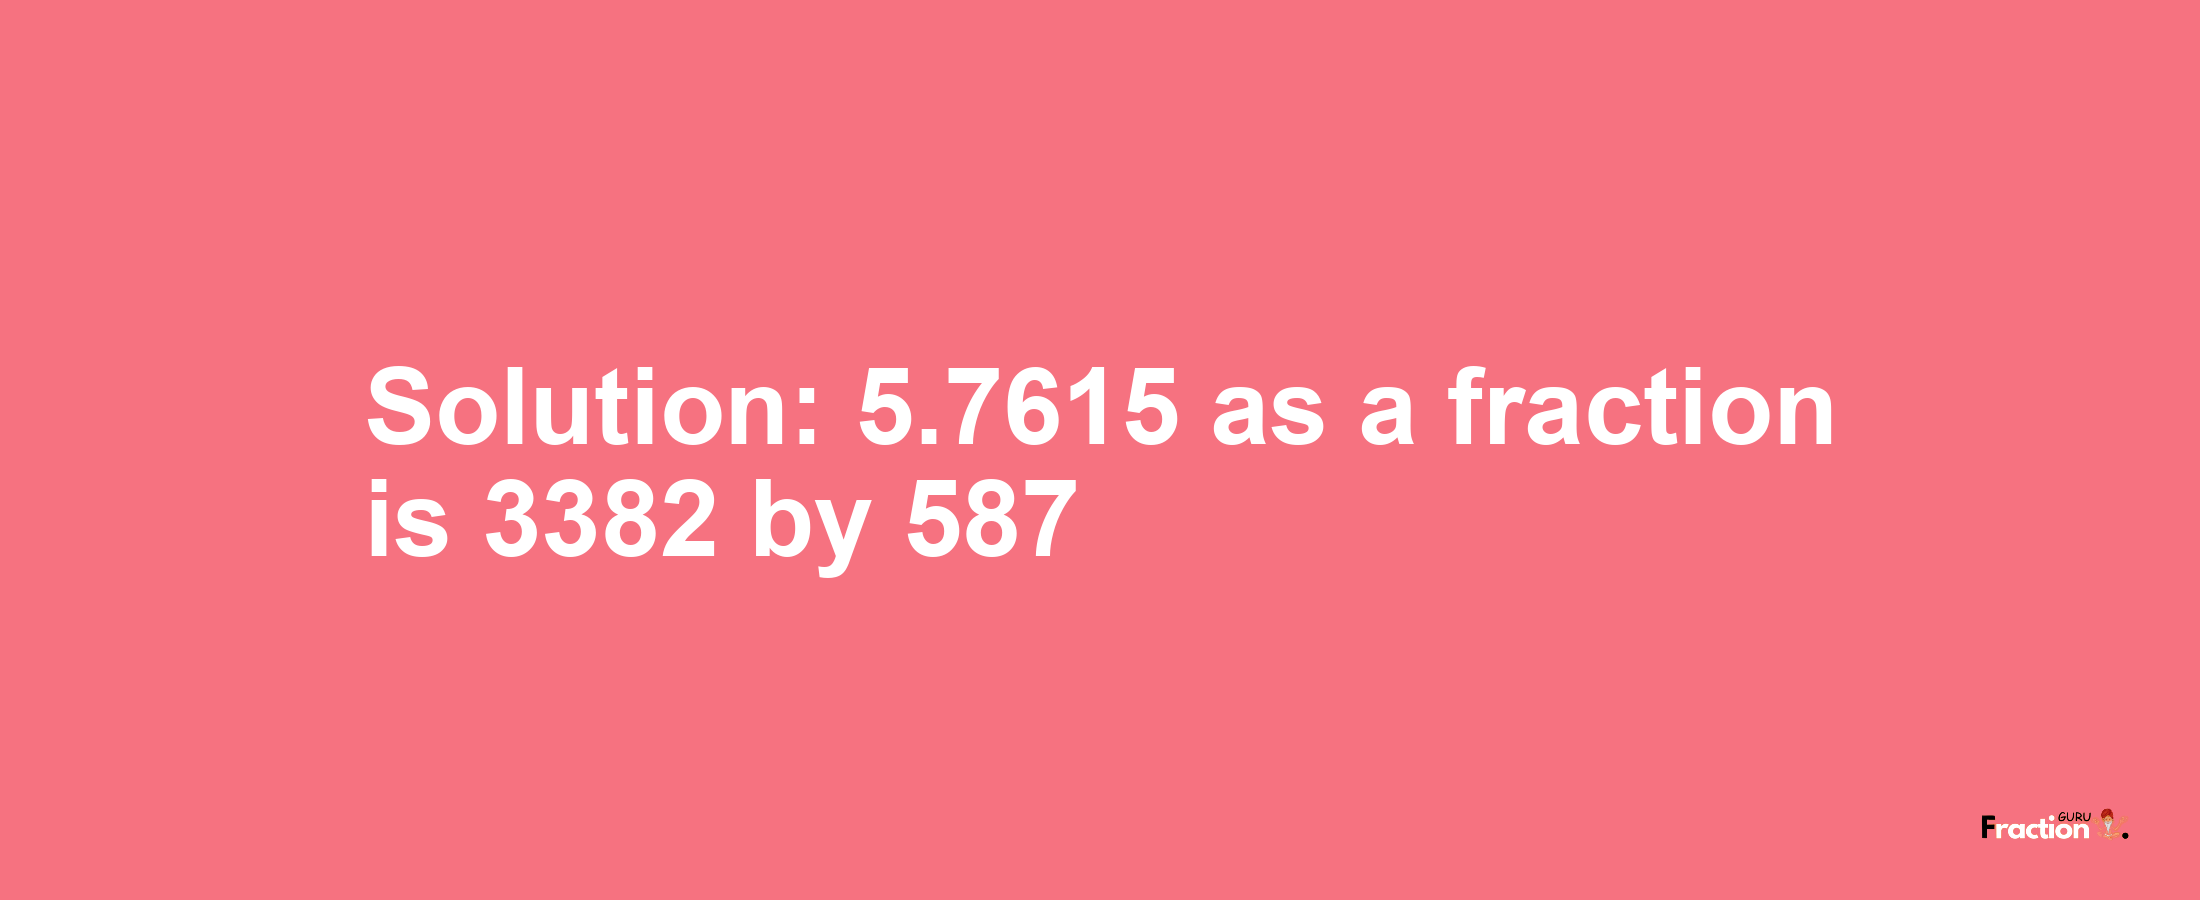 Solution:5.7615 as a fraction is 3382/587